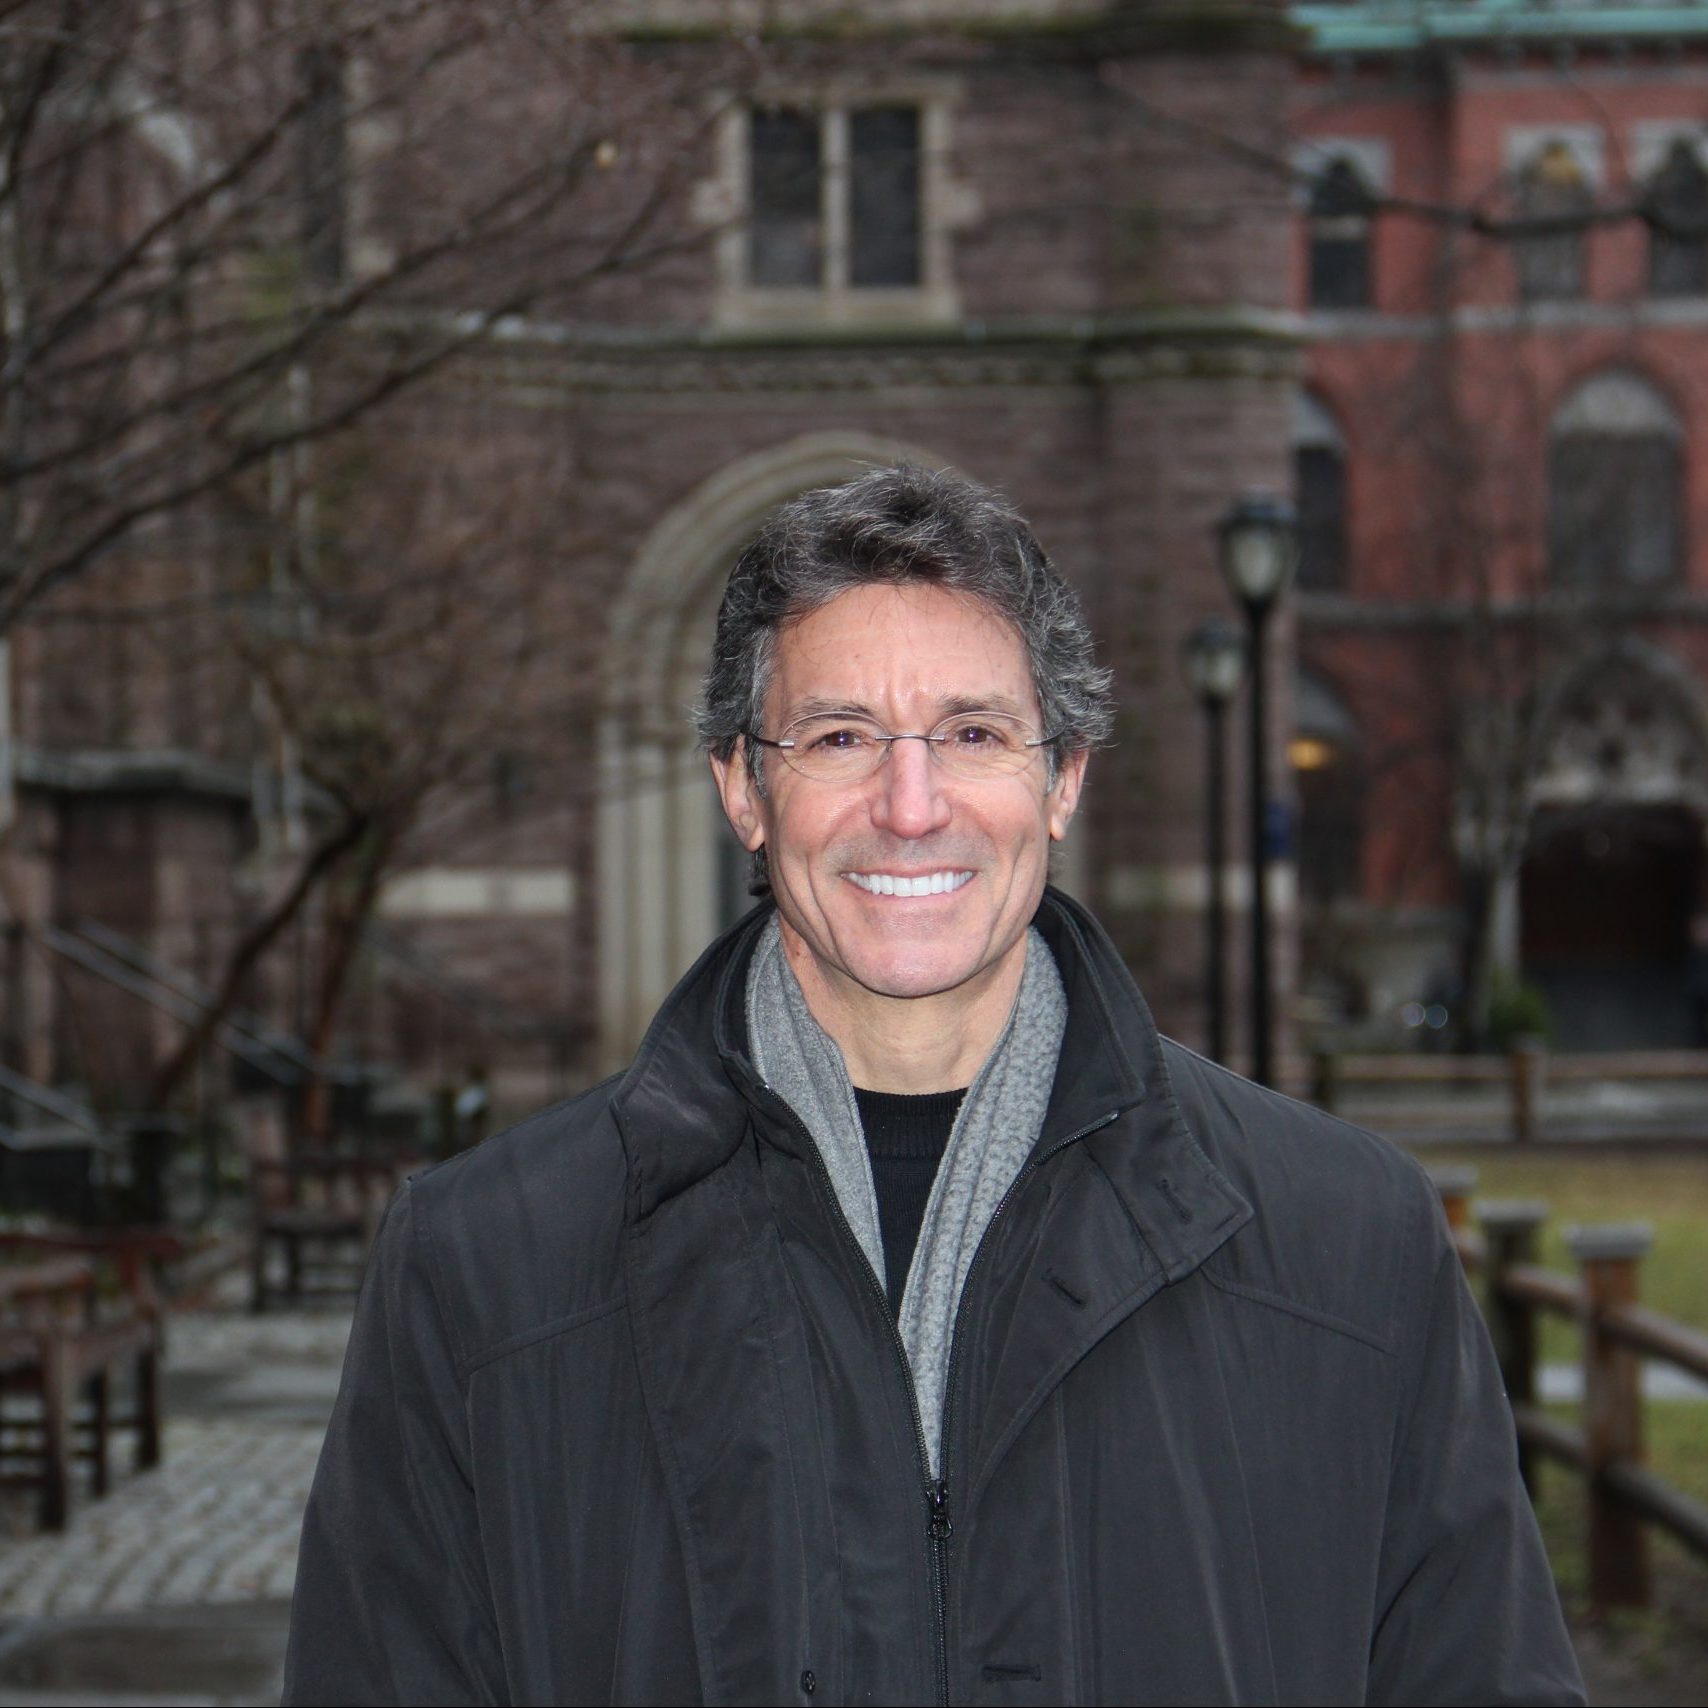 David L Katz MD in winter coat and scarf in front of a building at Yale University January 2020